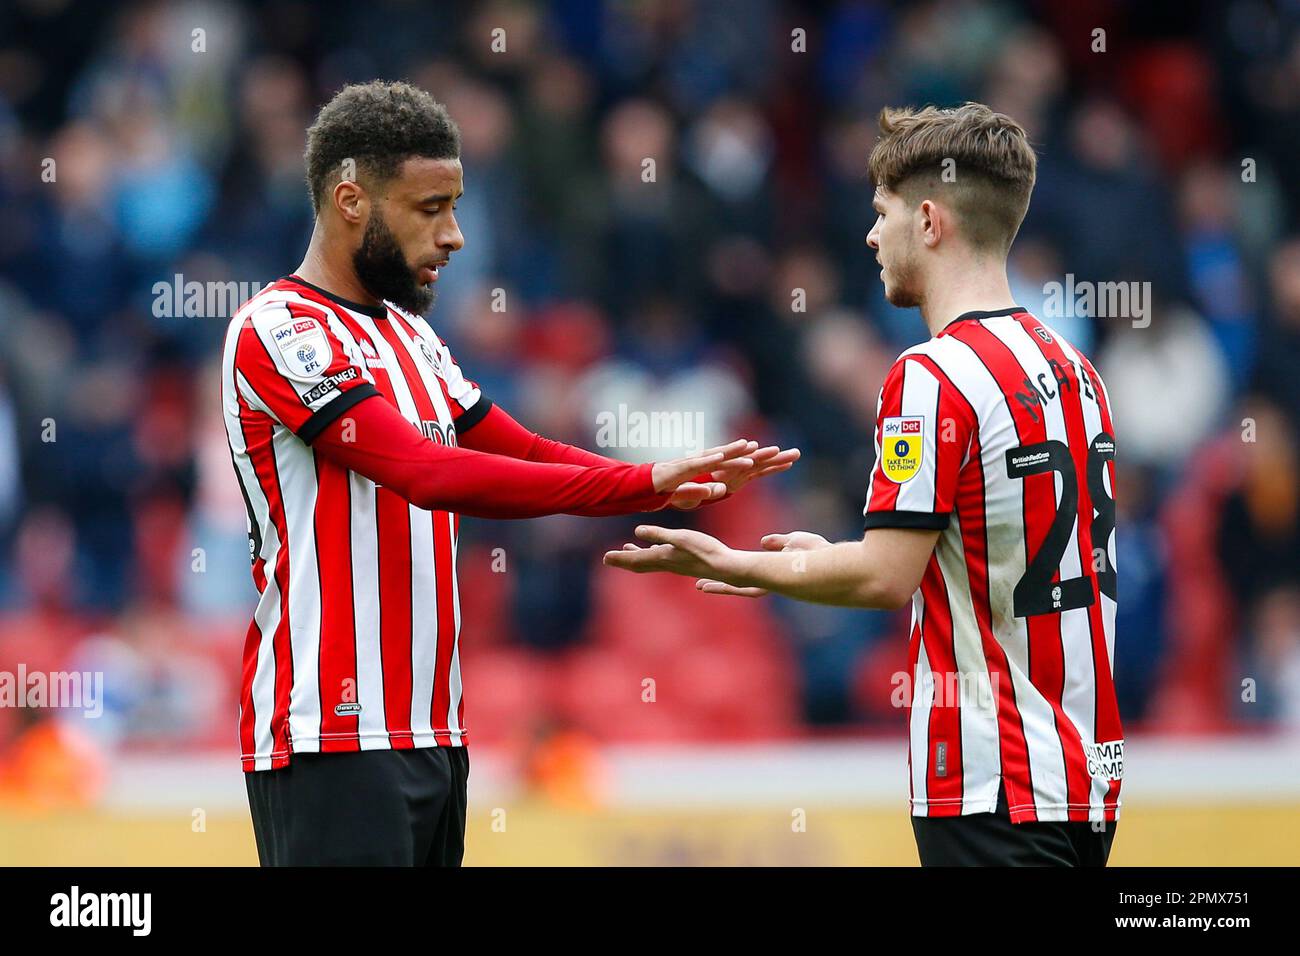 Jayden Bogle #20 of Sheffield United and James McAtee #28 of Sheffield United during the Sky Bet Championship match Sheffield United vs Cardiff City at Bramall Lane, Sheffield, United Kingdom, 15th April 2023  (Photo by Ben Early/News Images) Stock Photo